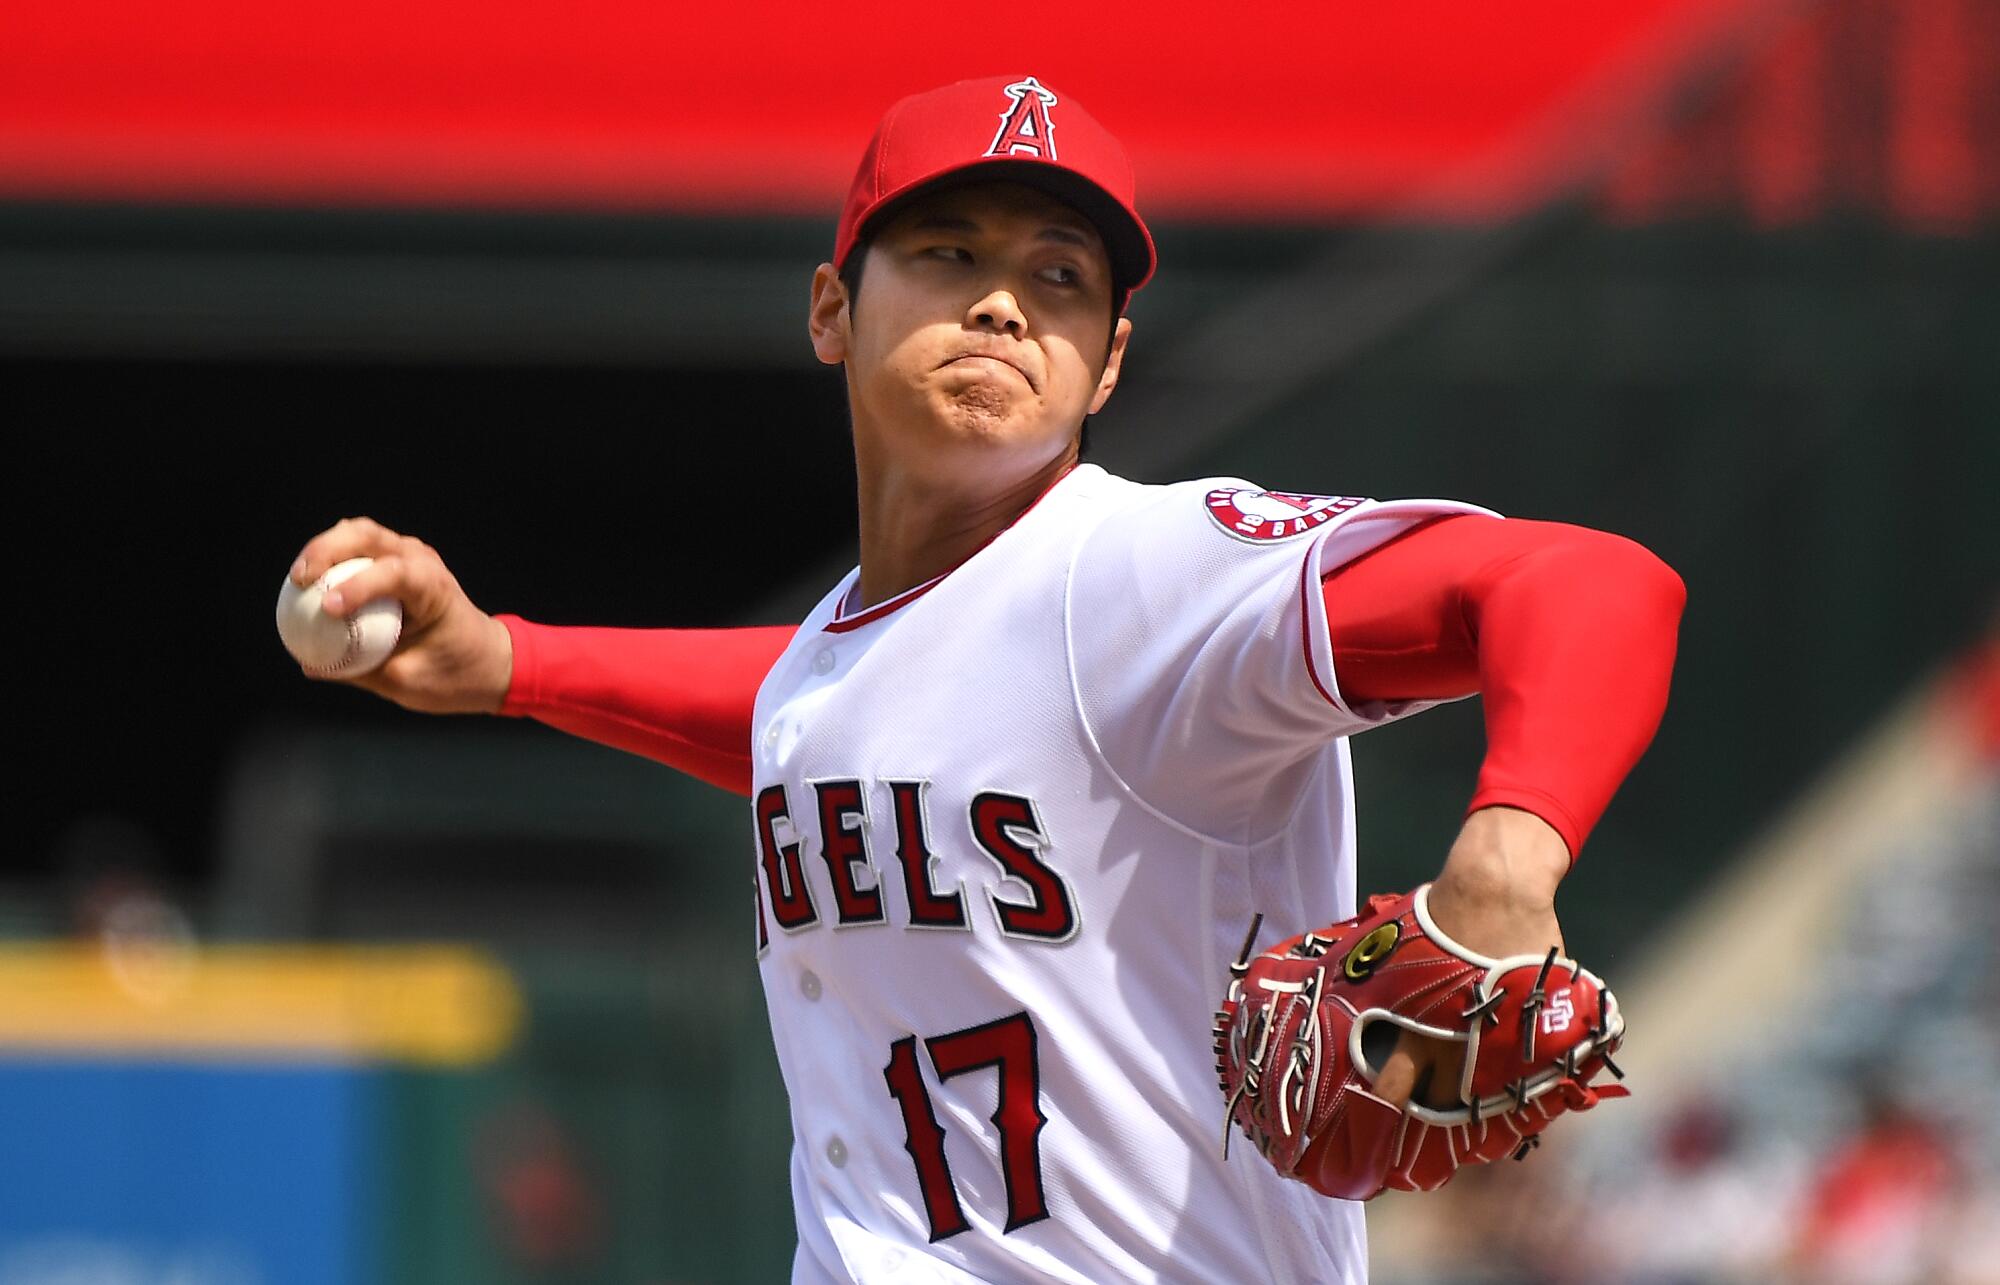 Shohei Ohtani pitches for the Angels.